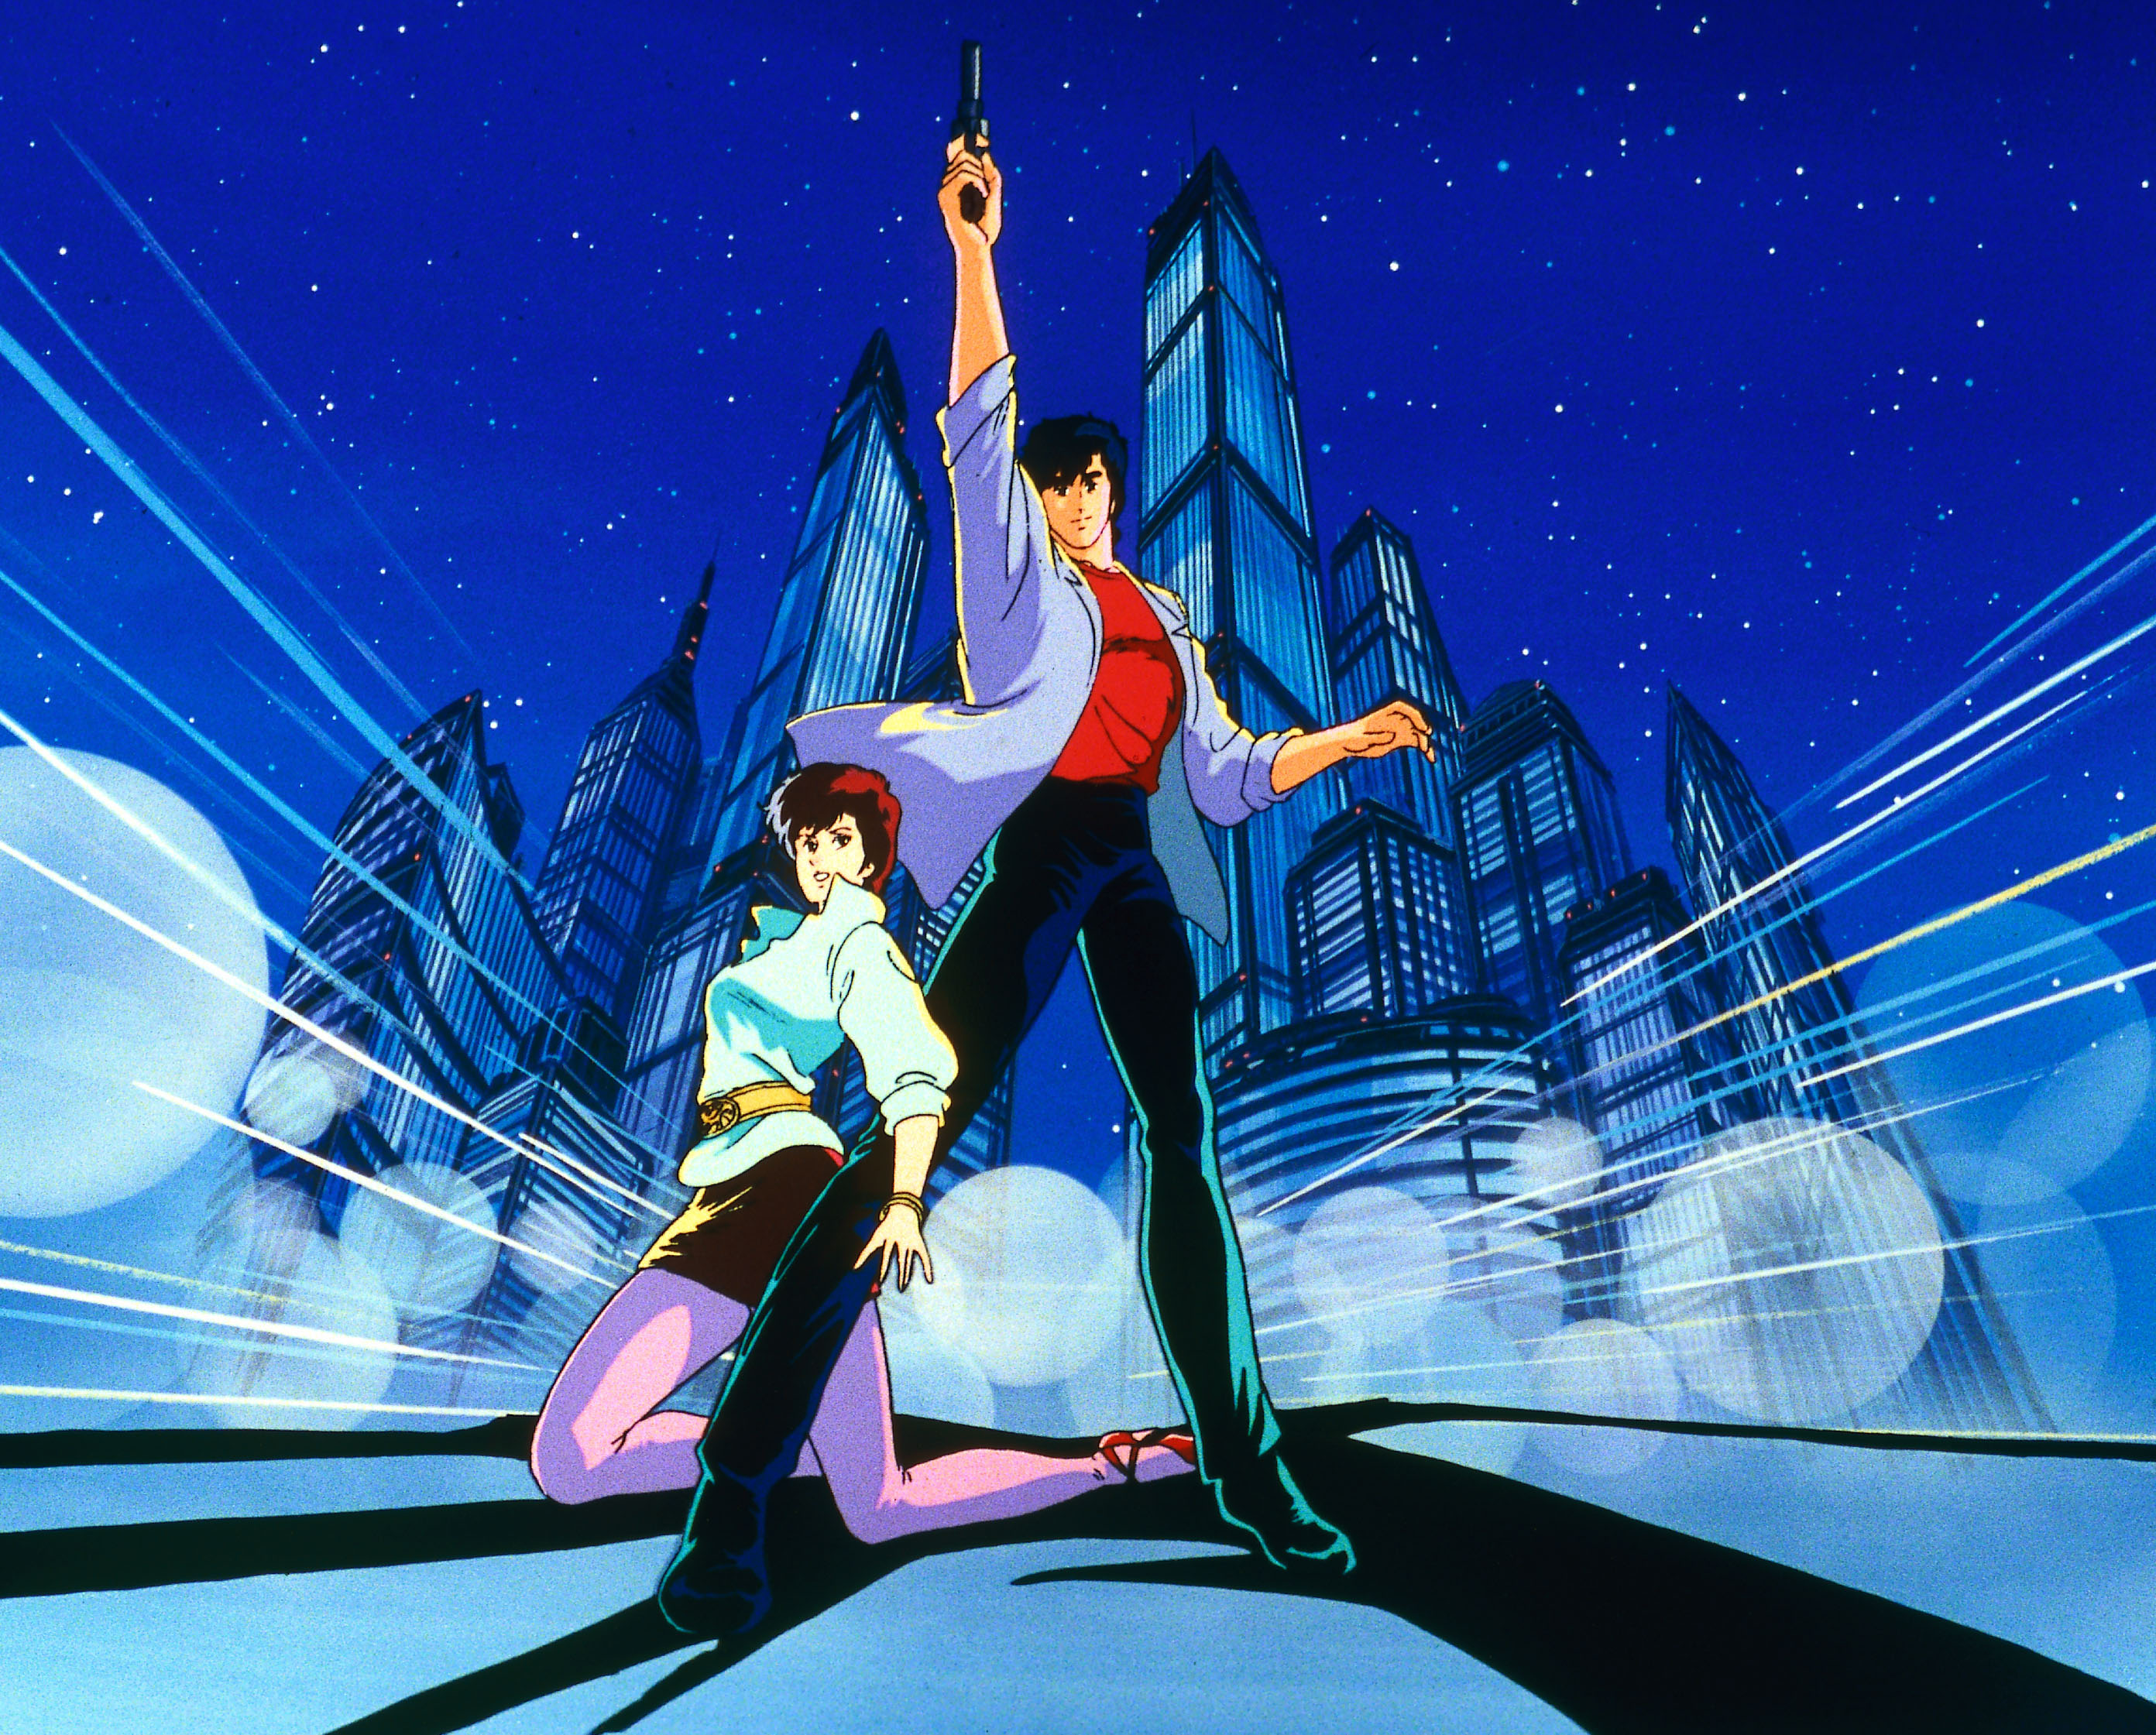 14 City Hunter Anime Wallpapers   ImgHD Browse and Download Free